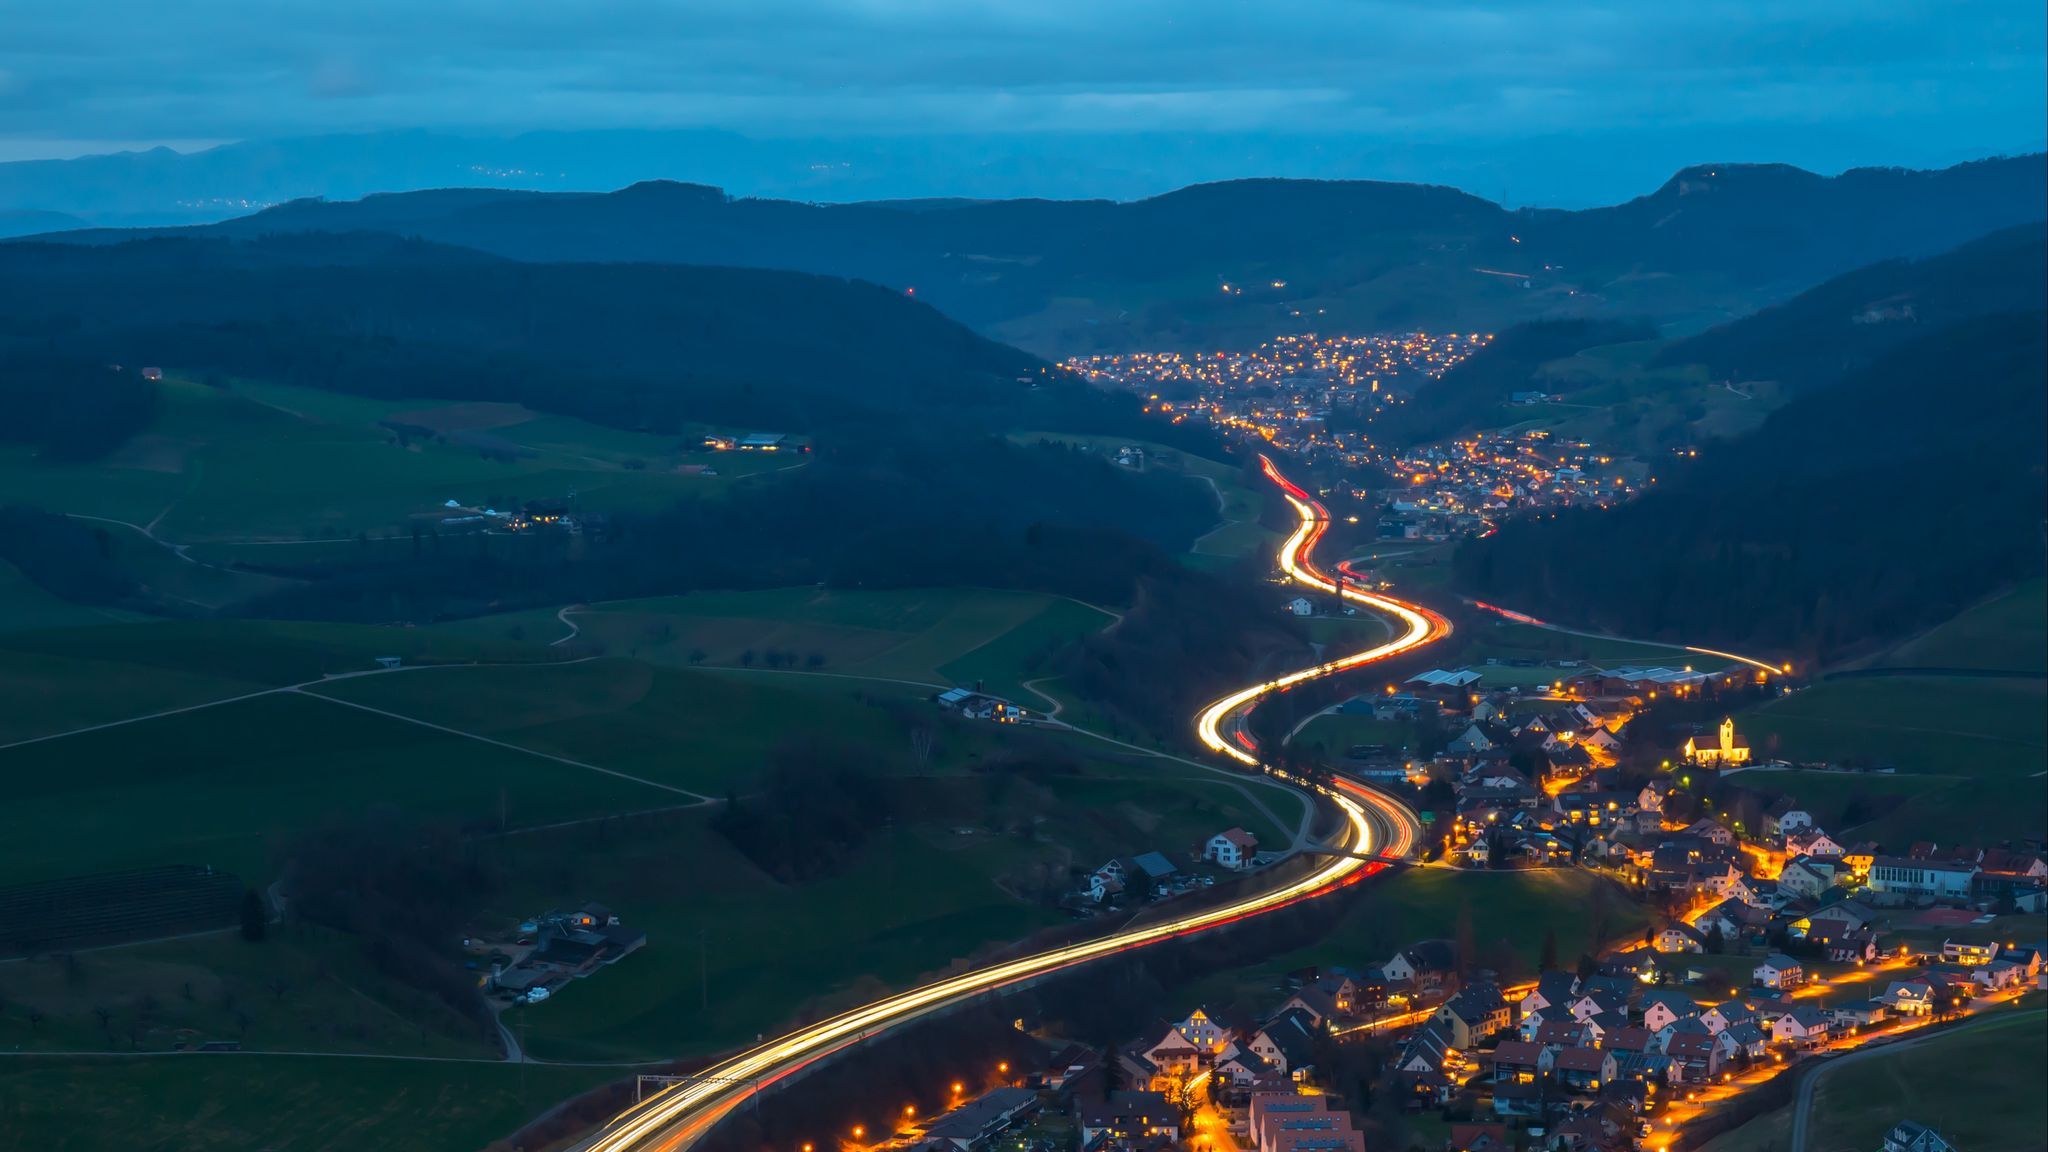 Download wallpaper 2048x1152 village, road, aerial view, night, mountains, switzerland ultrawide monitor HD background